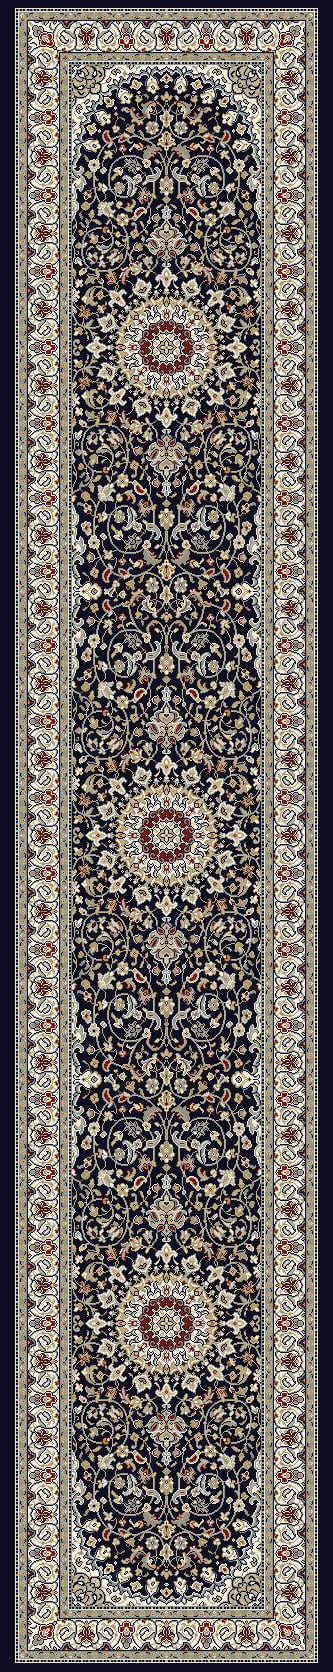 Dynamic Area Rugs Ancient Garden Area Rugs 57119-3434 Navy100% Poly Belgium 17 Sizes